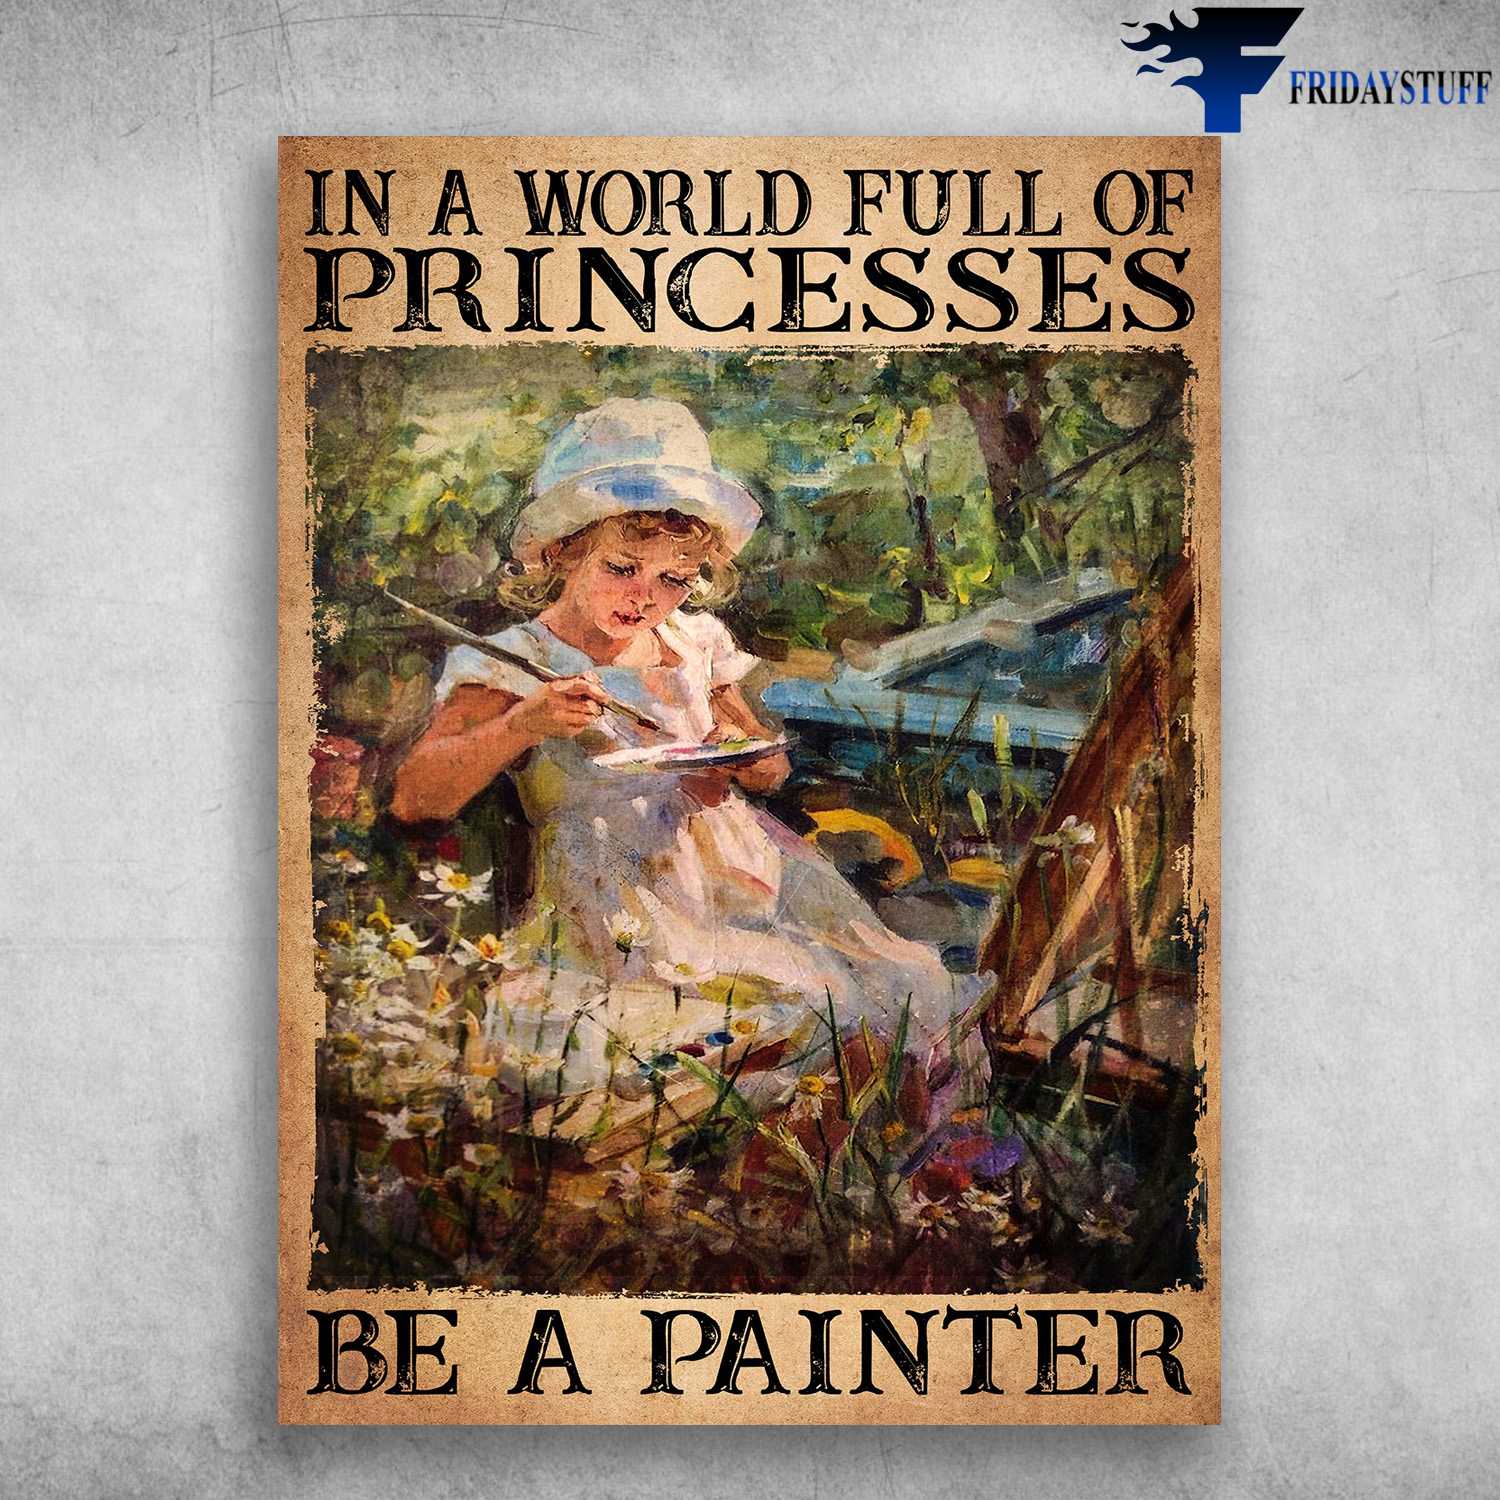 Drawing Little Girl - In A World Full Of Princesses, Be A Painter